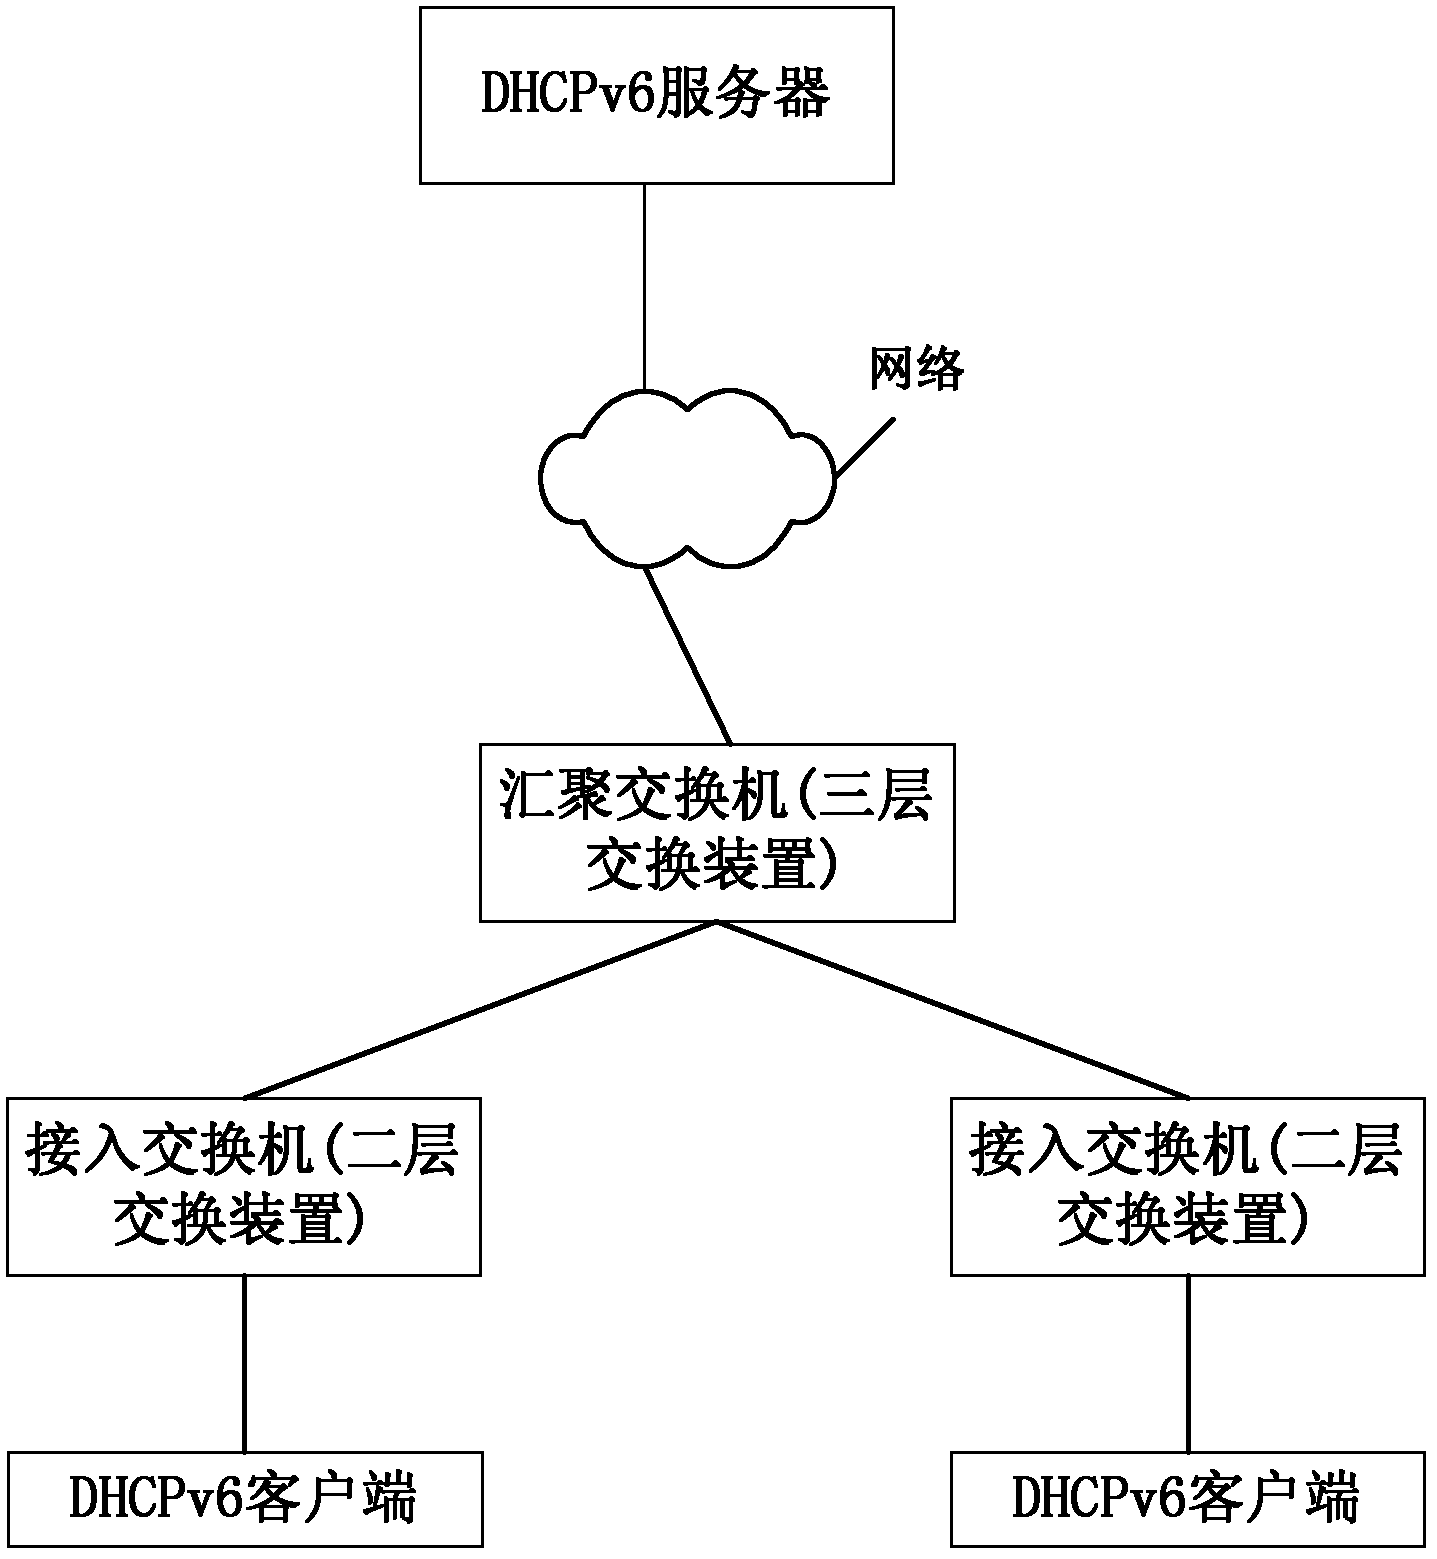 System and method for internet protocol version 6 (IPv6) message switching based on dynamic host configuration protocol for IPv6 (DHCPv6) interception